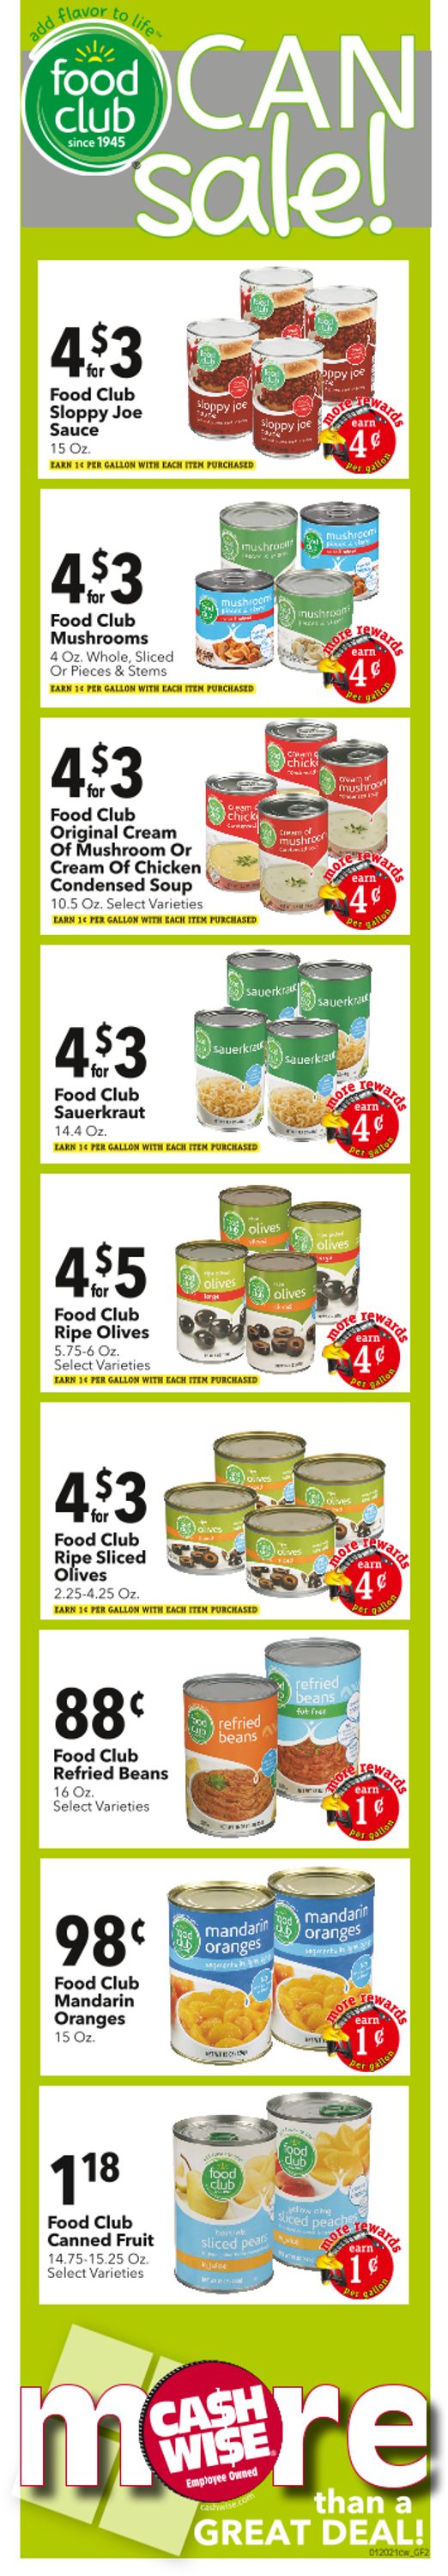 Cash Wise Weekly Ad Circular - valid 01/20-01/26/2021 (Page 6)